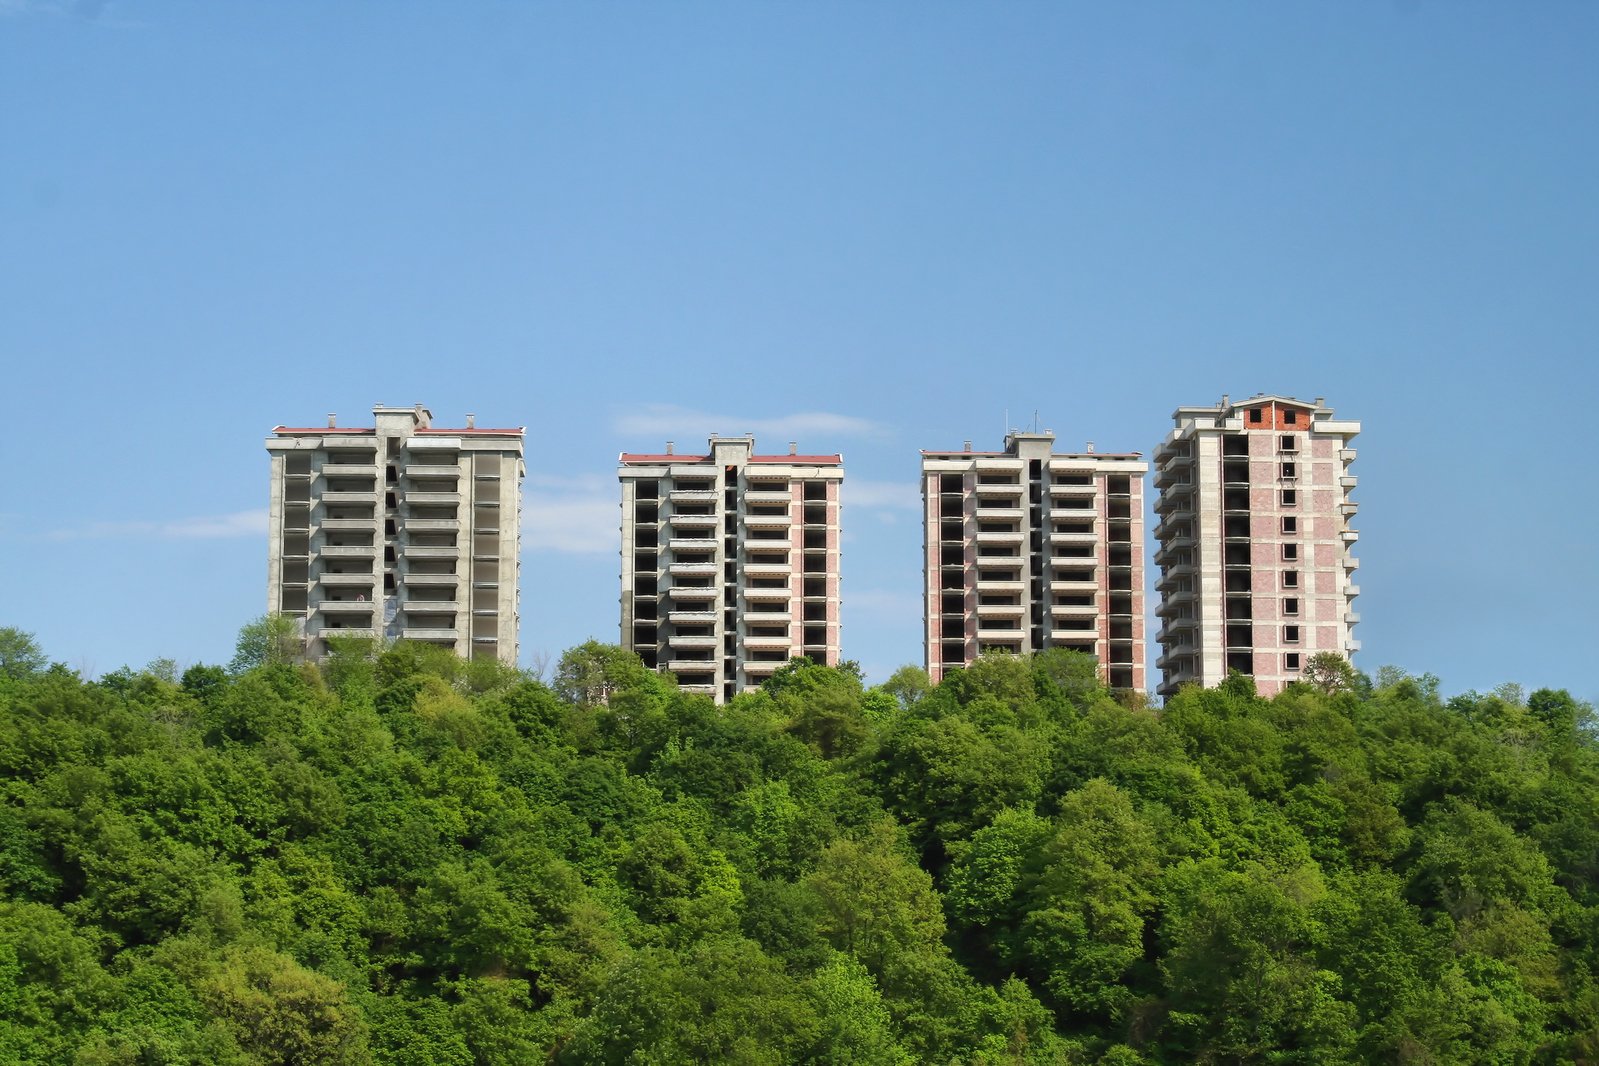 the tall buildings are surrounded by lush green trees